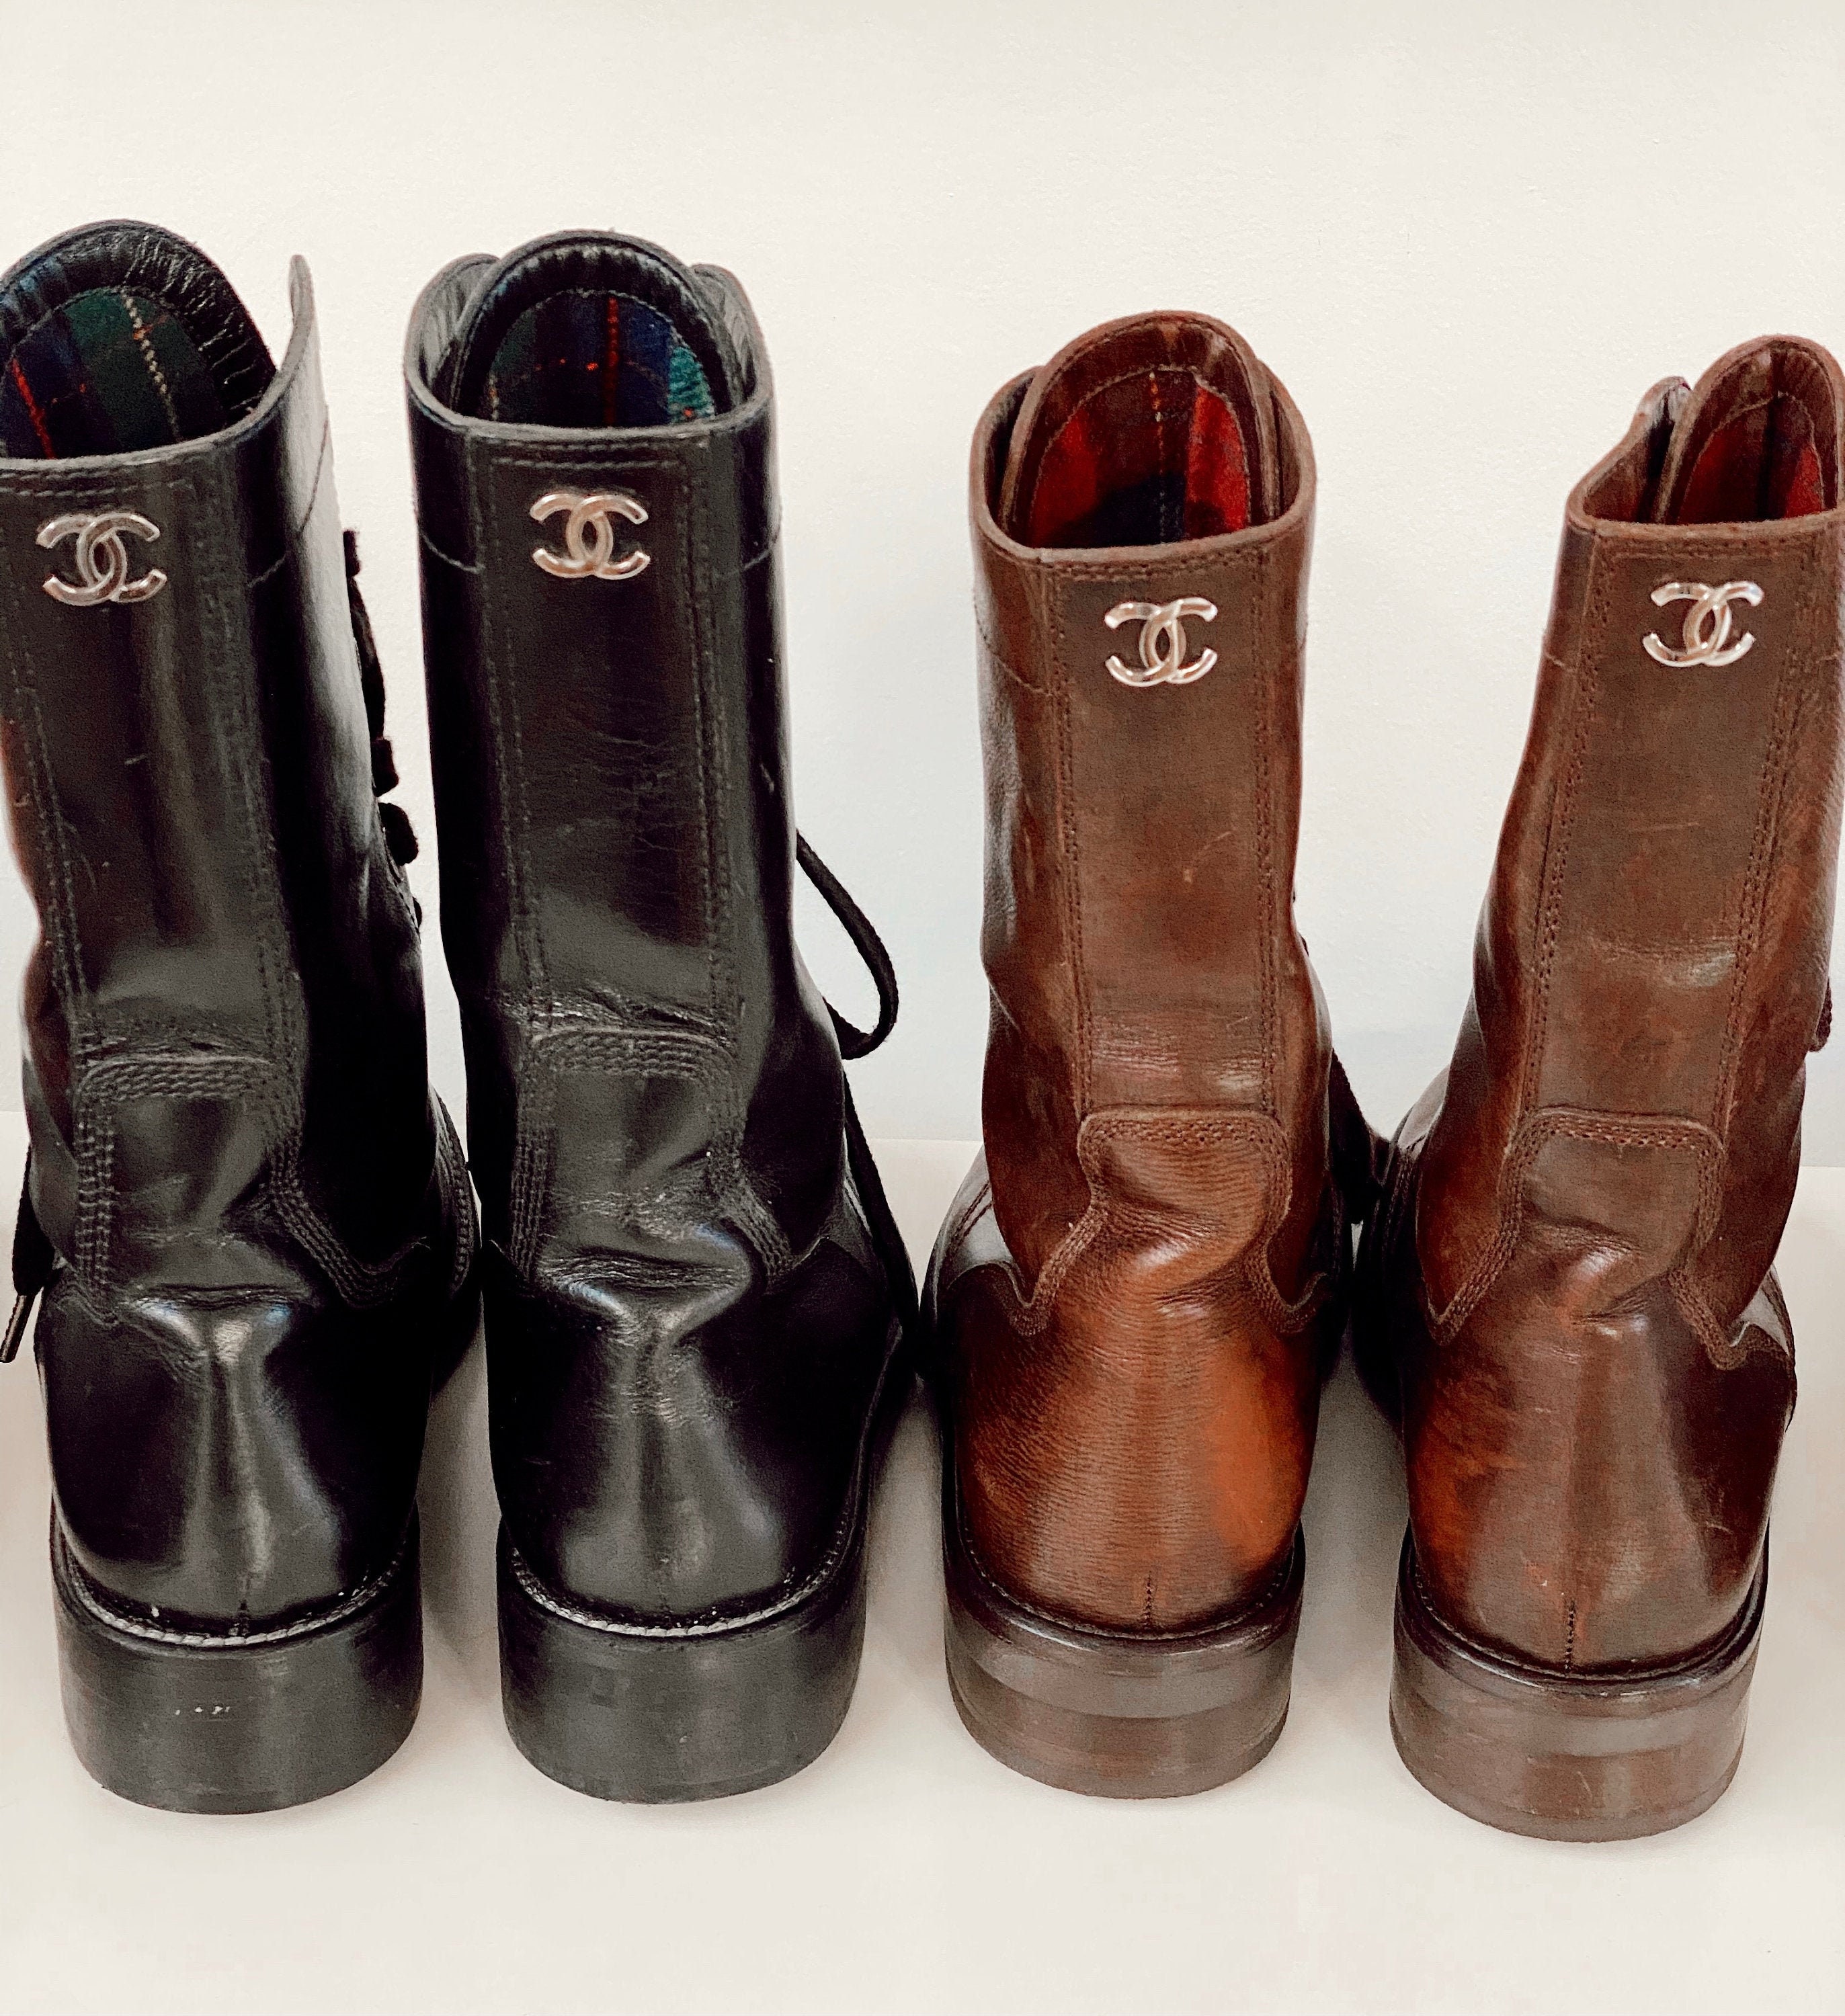 Vintage CHANEL Fall 1991 Motorcycle Boots at Rice and Beans Vintage